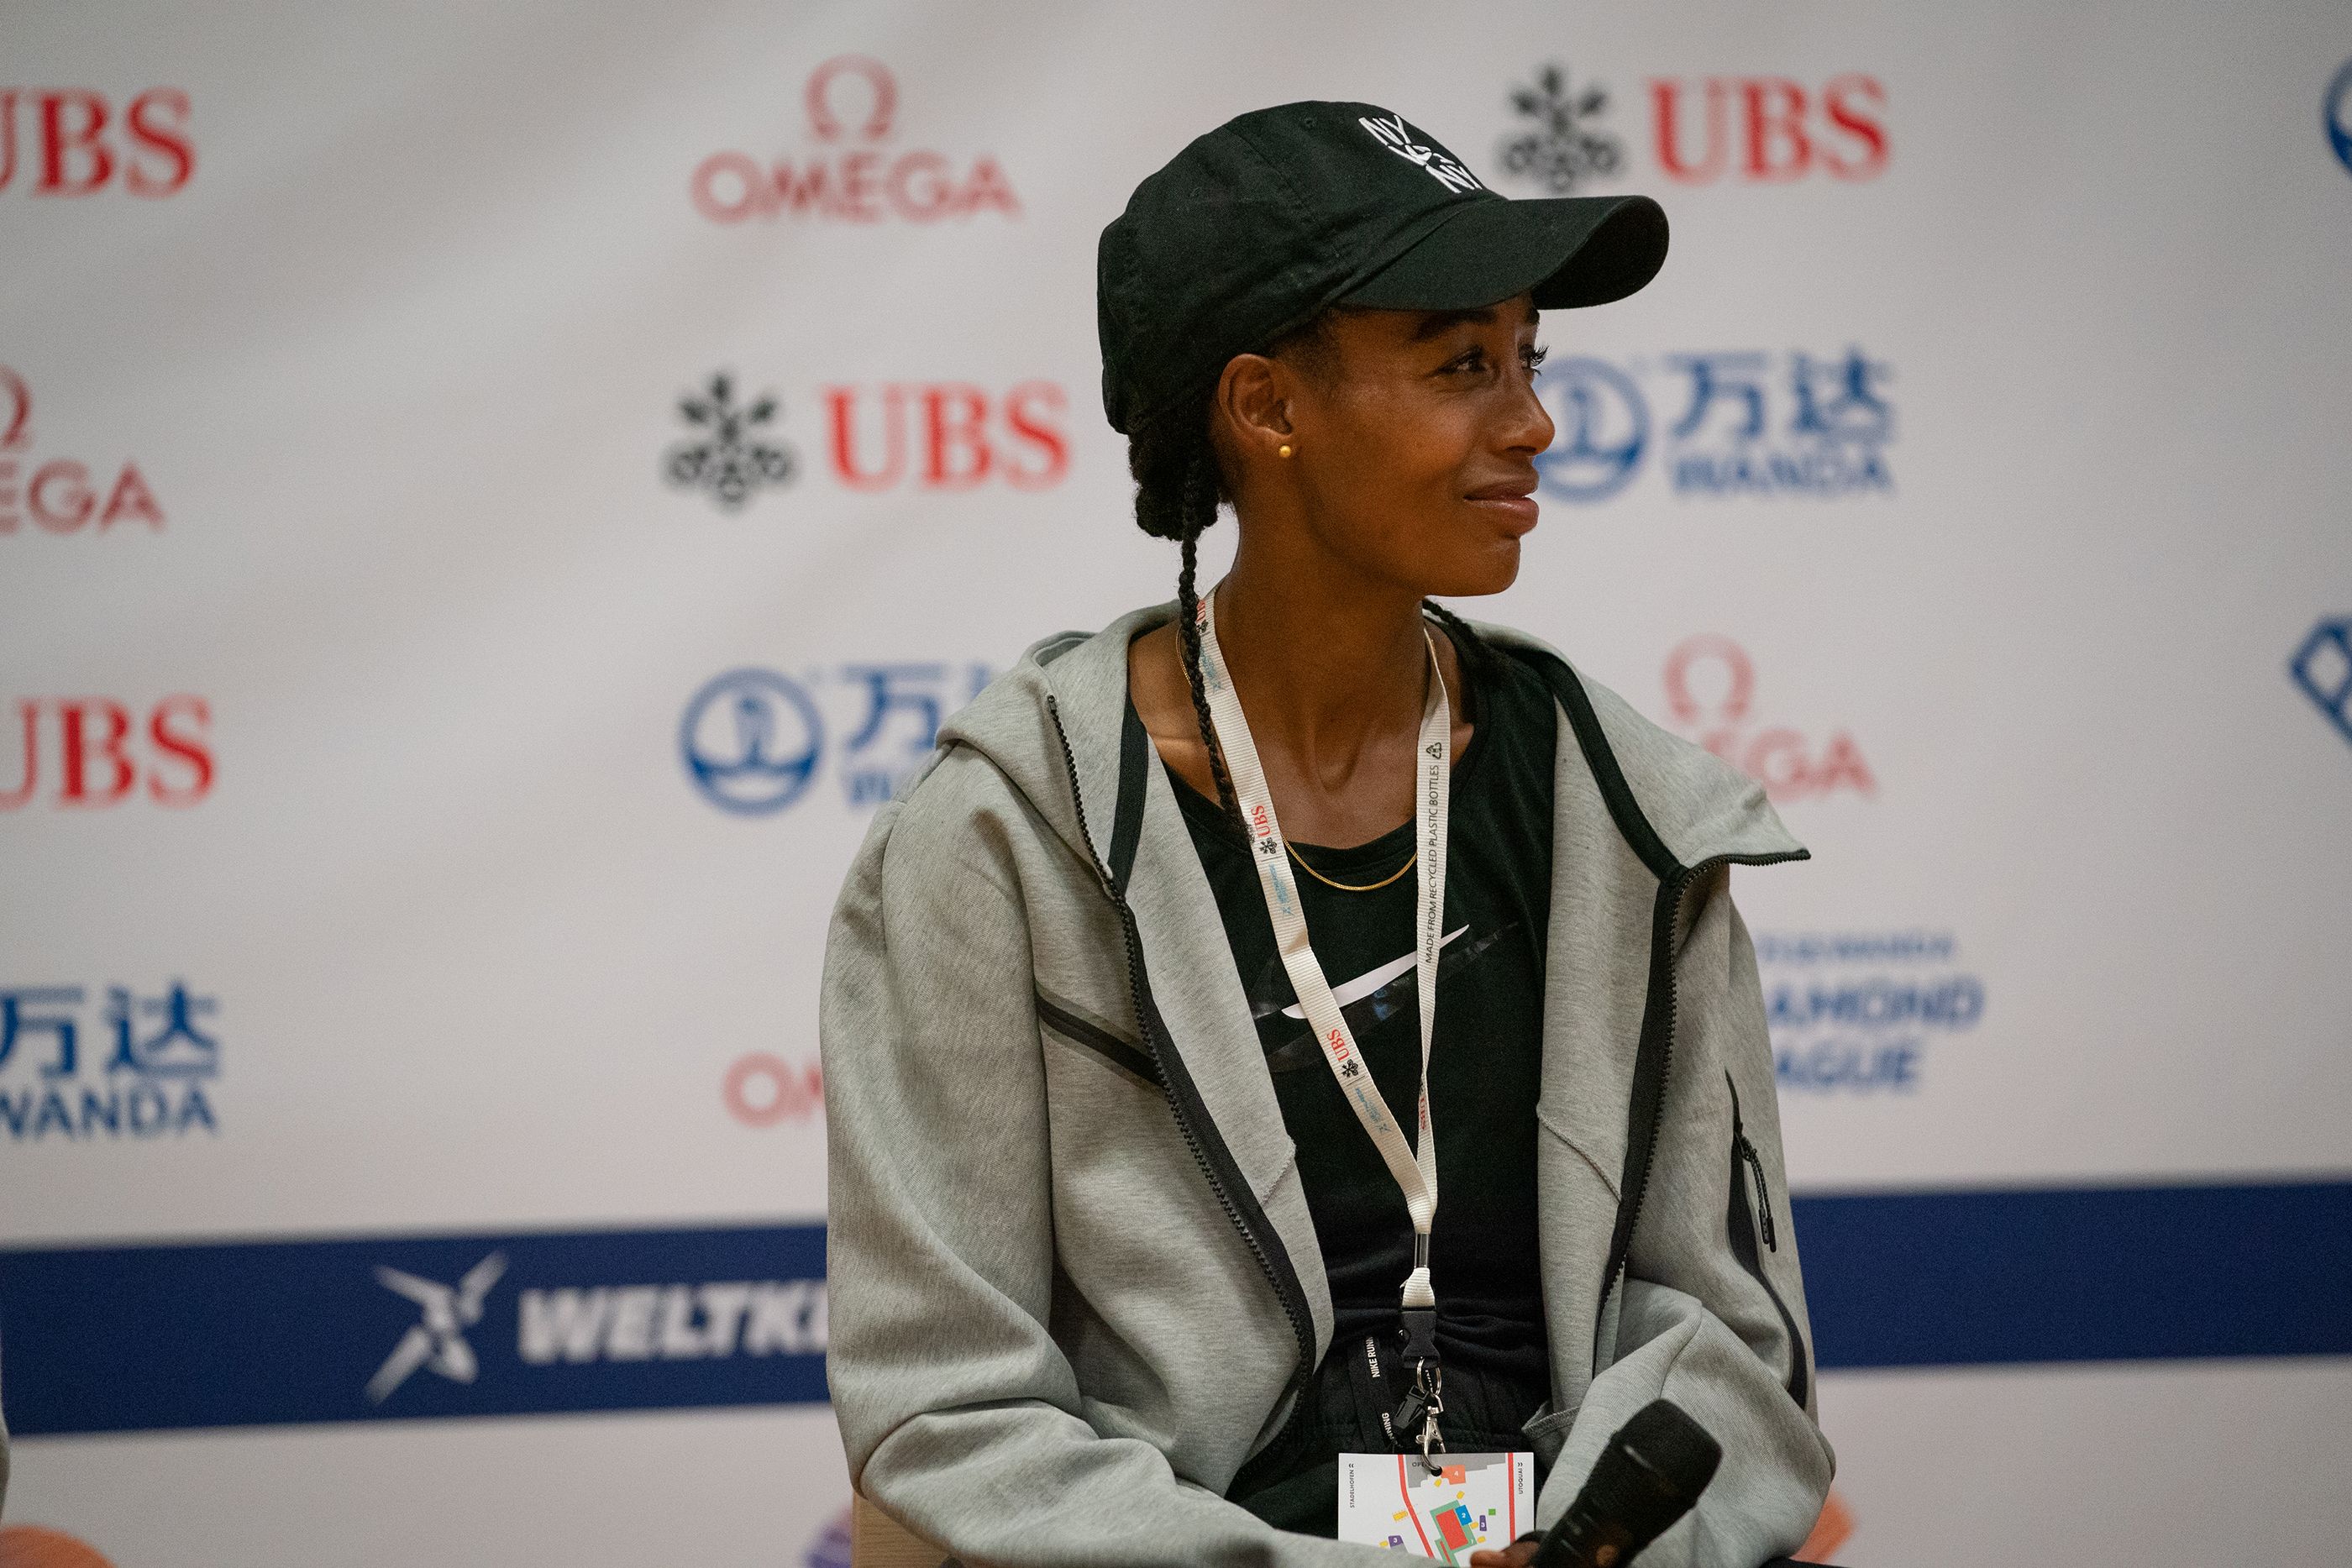 Sifan Hassan speaks with the media ahead of the Wanda Diamond League final in Zurich